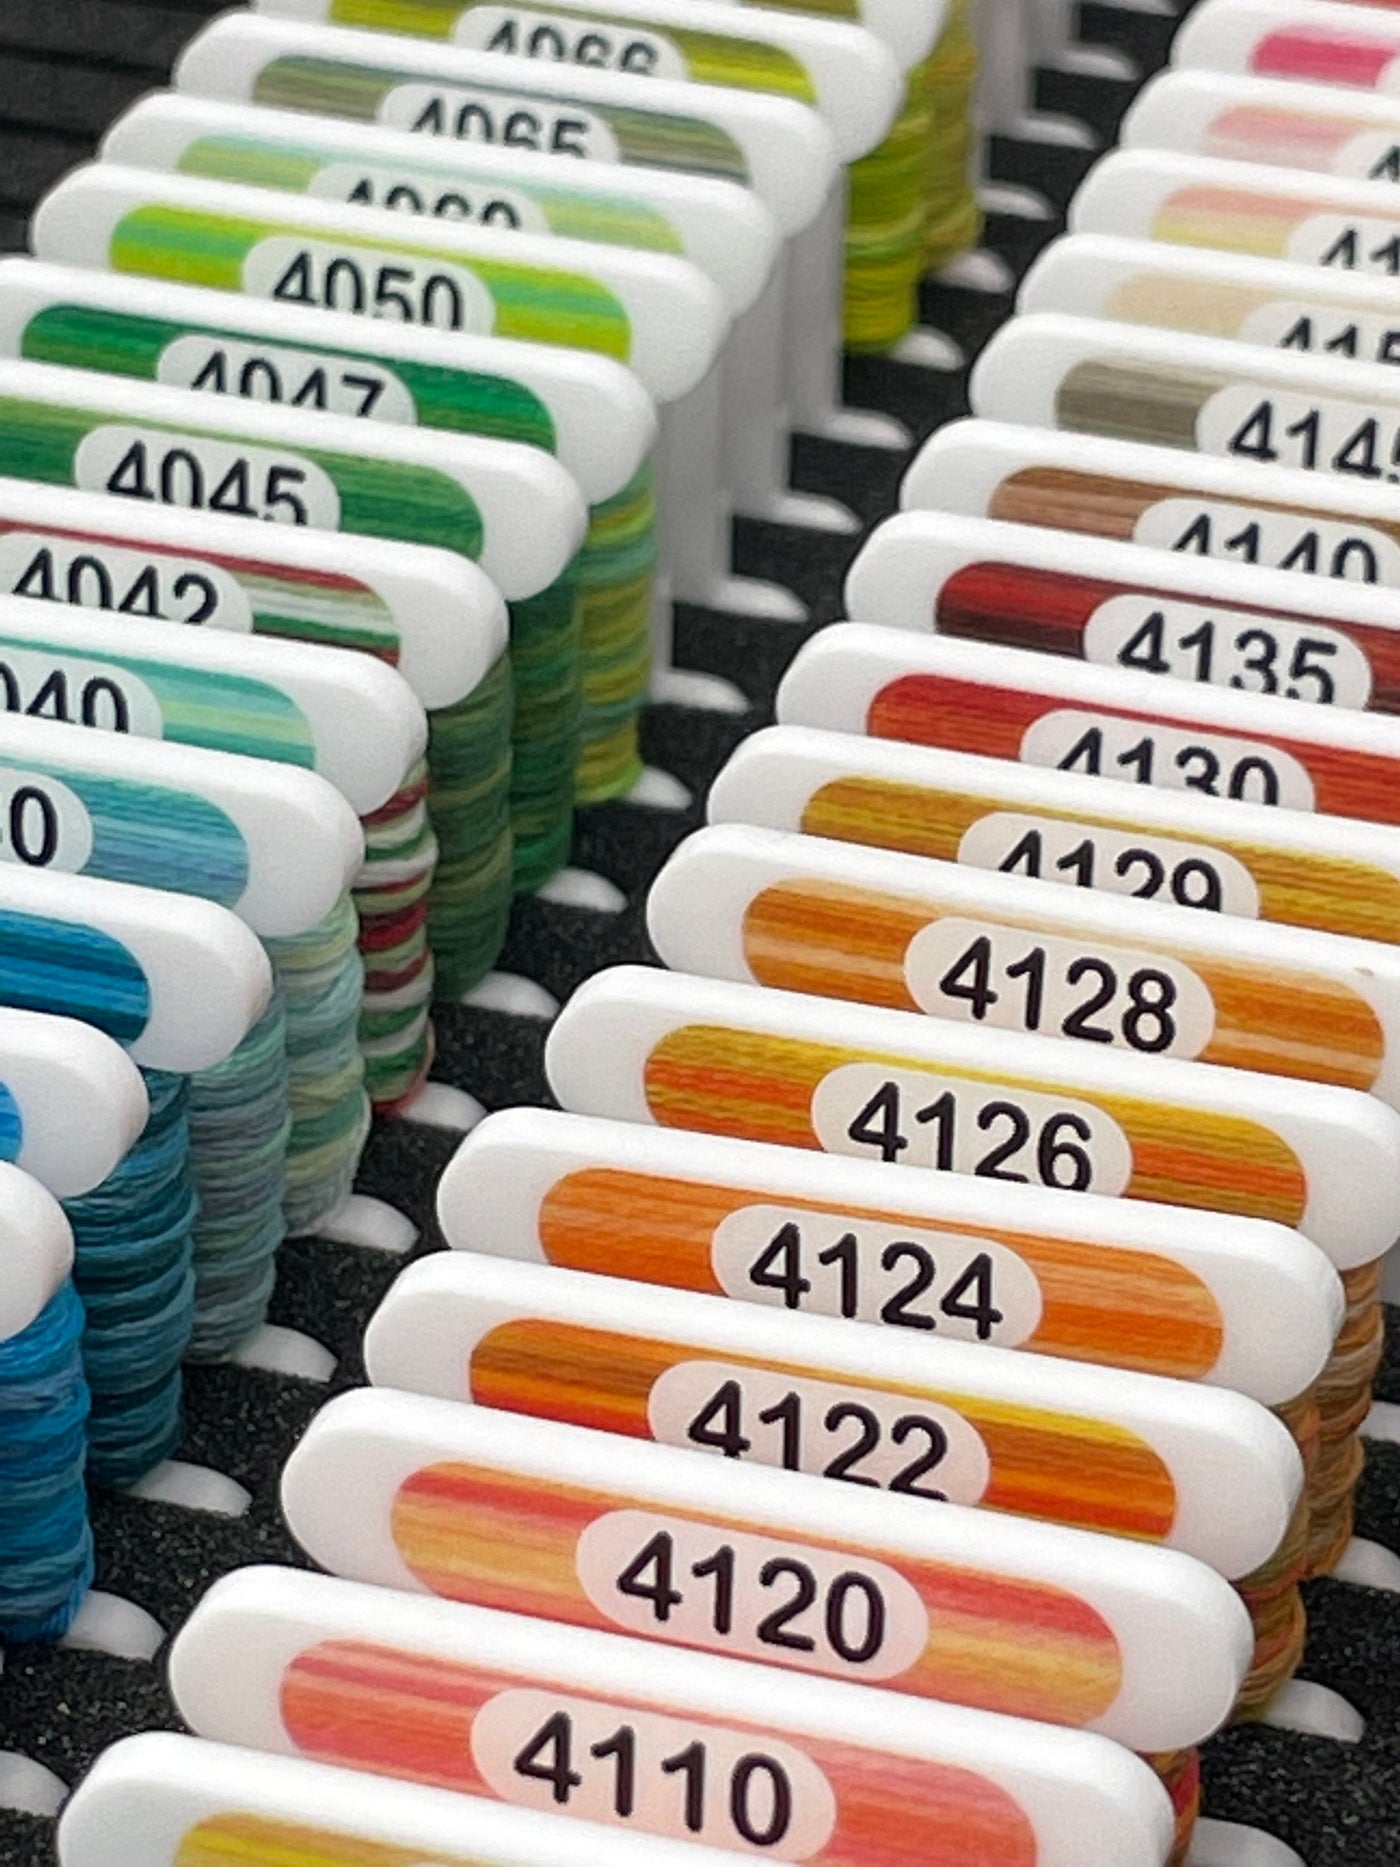 DMC Colour Variations & Coloris 3mm acrylic bobbins with printed number and colours (x84 bobbins)